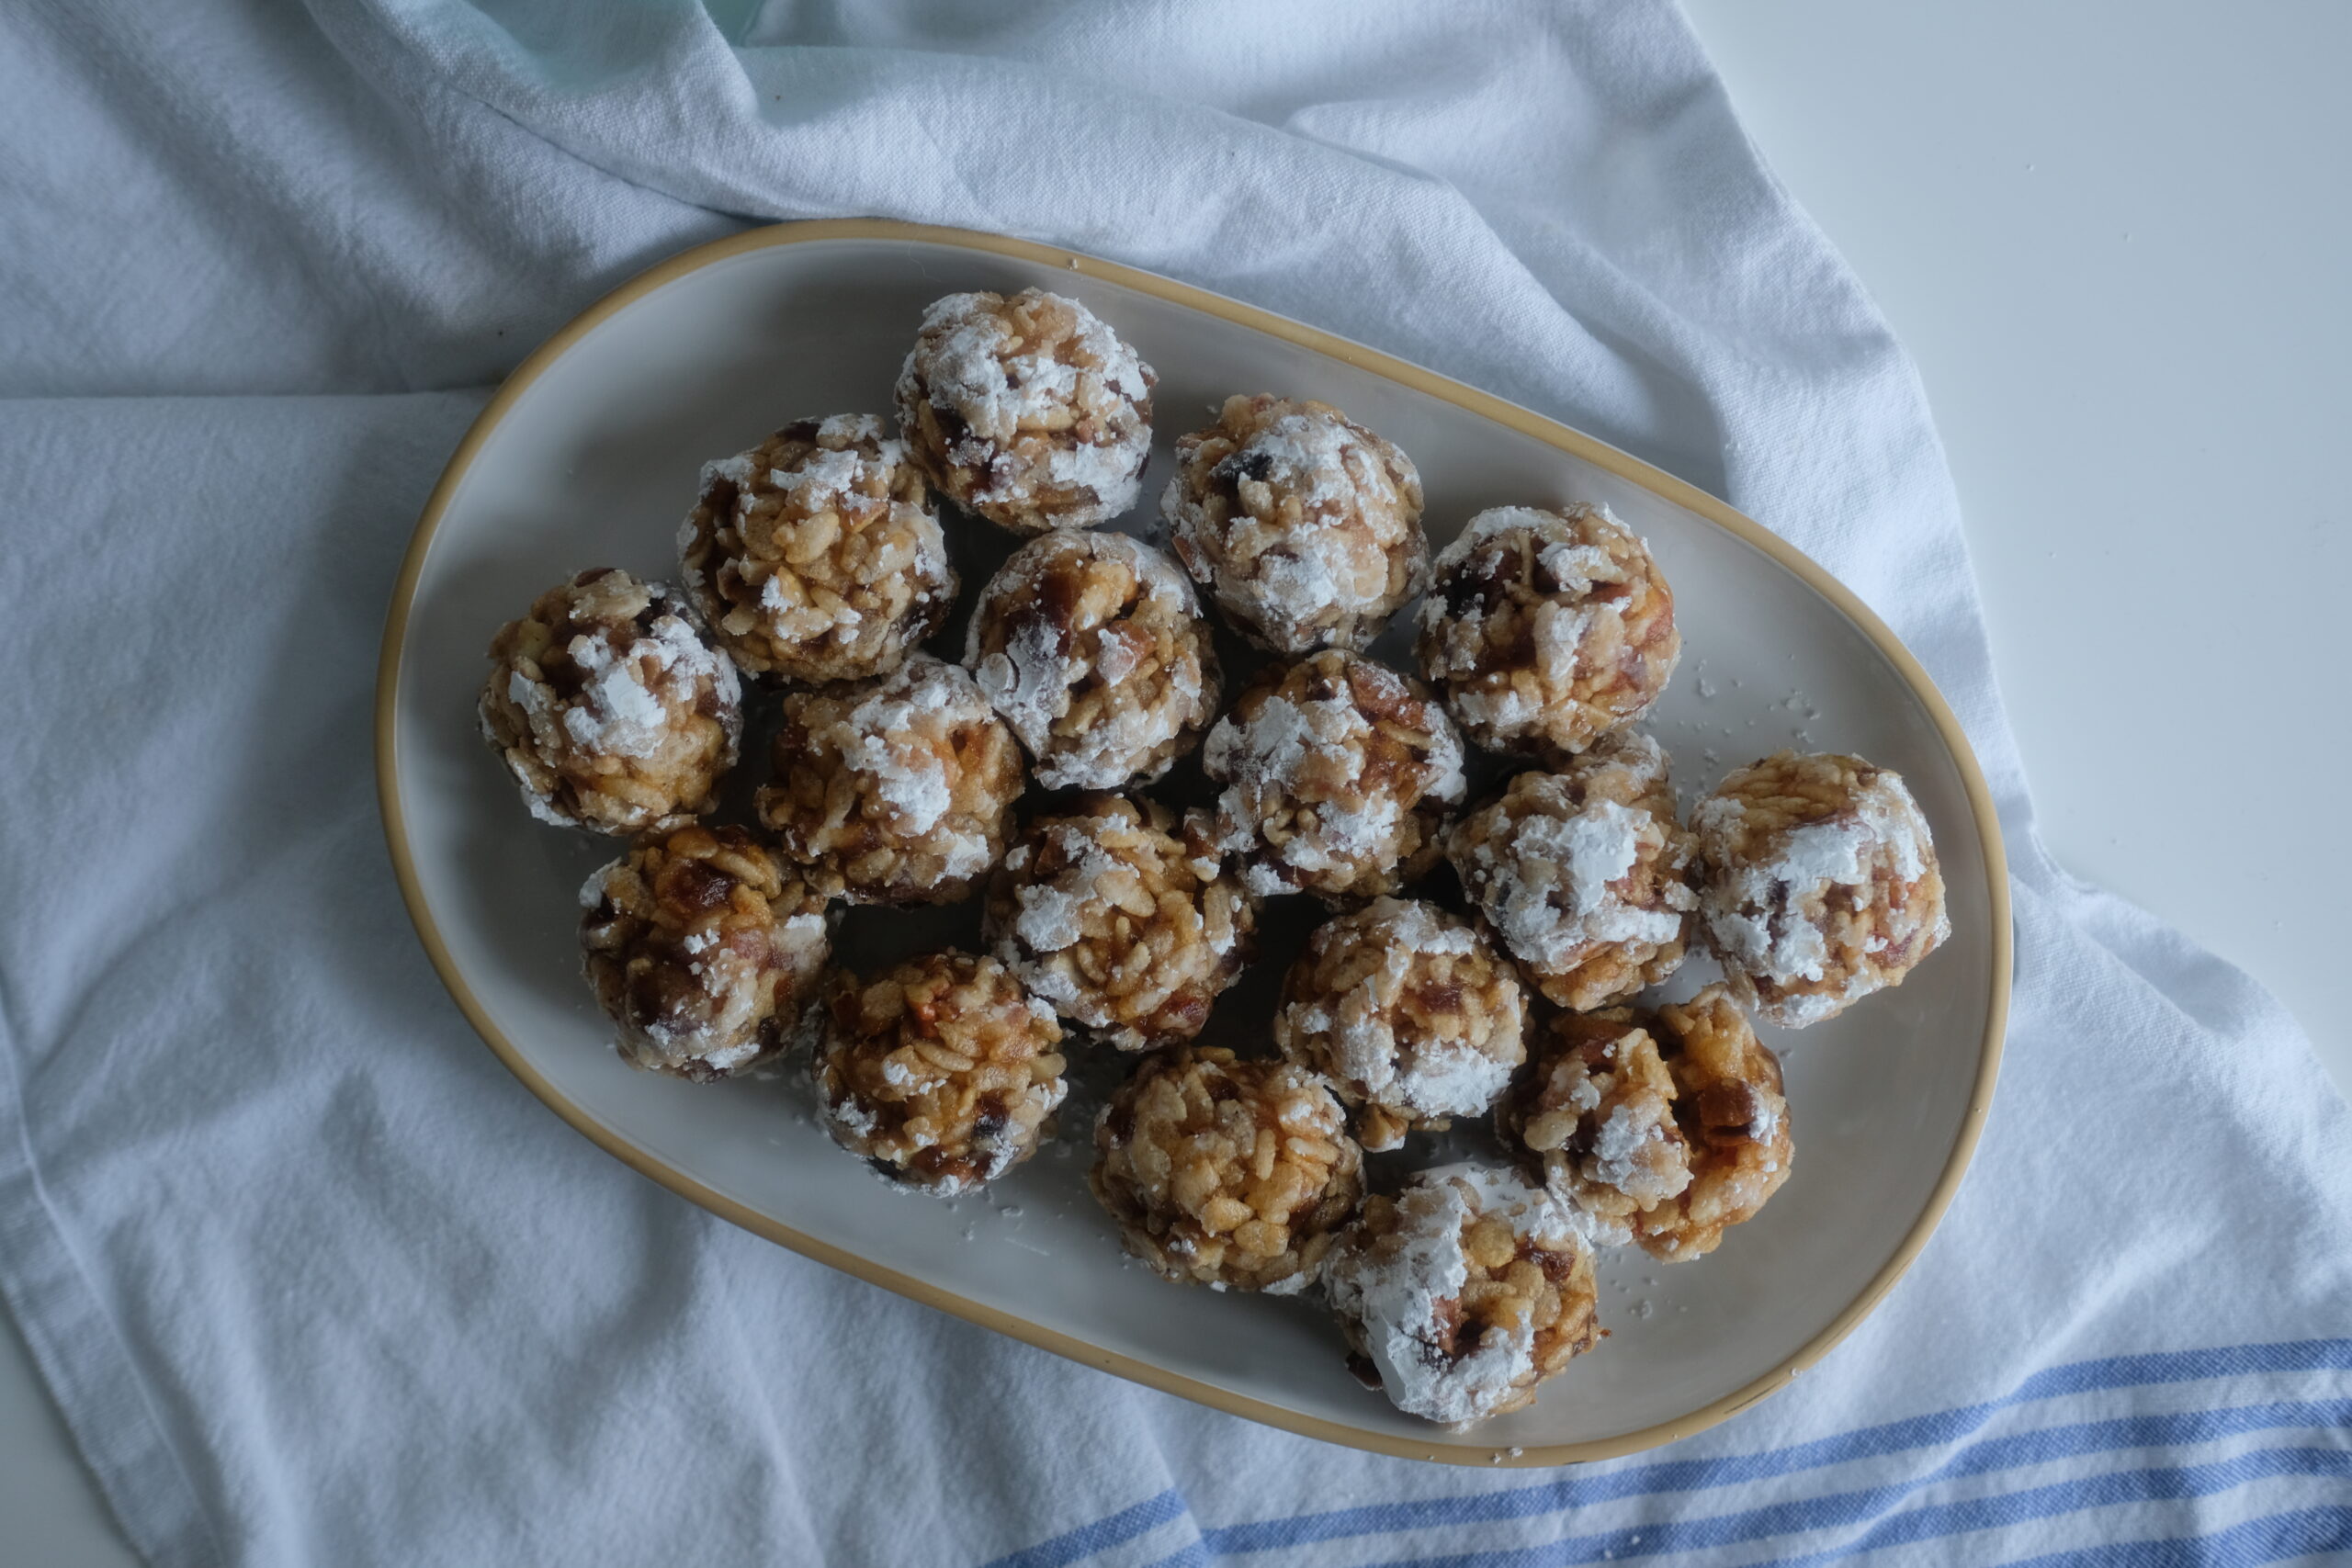 Wanna date? As sweet as sugar, these beloved and retro Date Balls also go by another name, “Humdingers.”